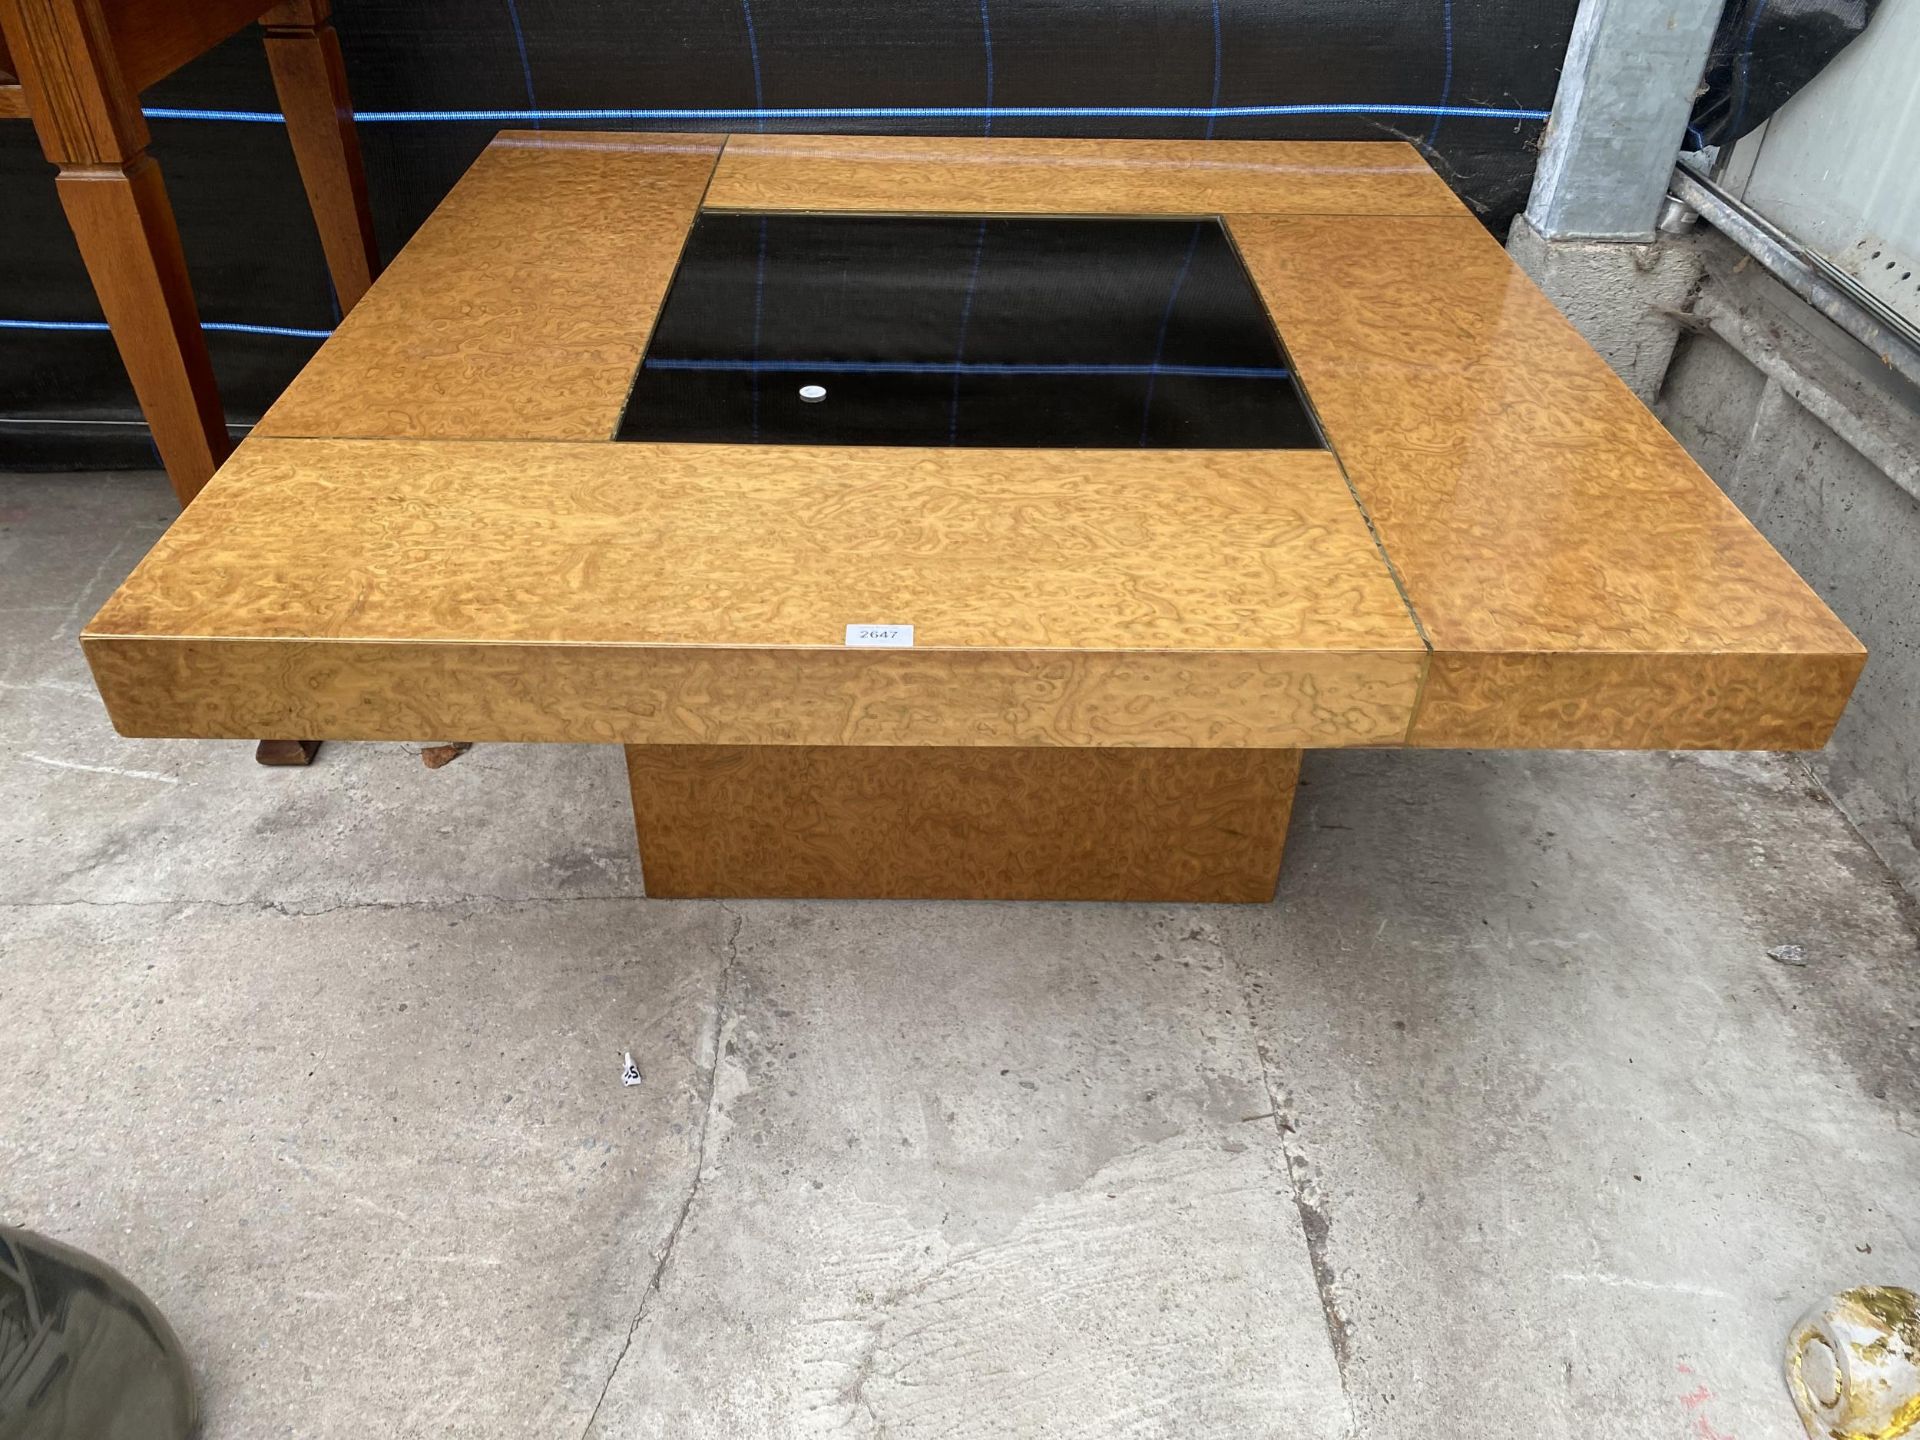 A BIRDSEYE MAPLE COFFEE TABLE WITH INSET GLASS TOP, 39" SQUARE